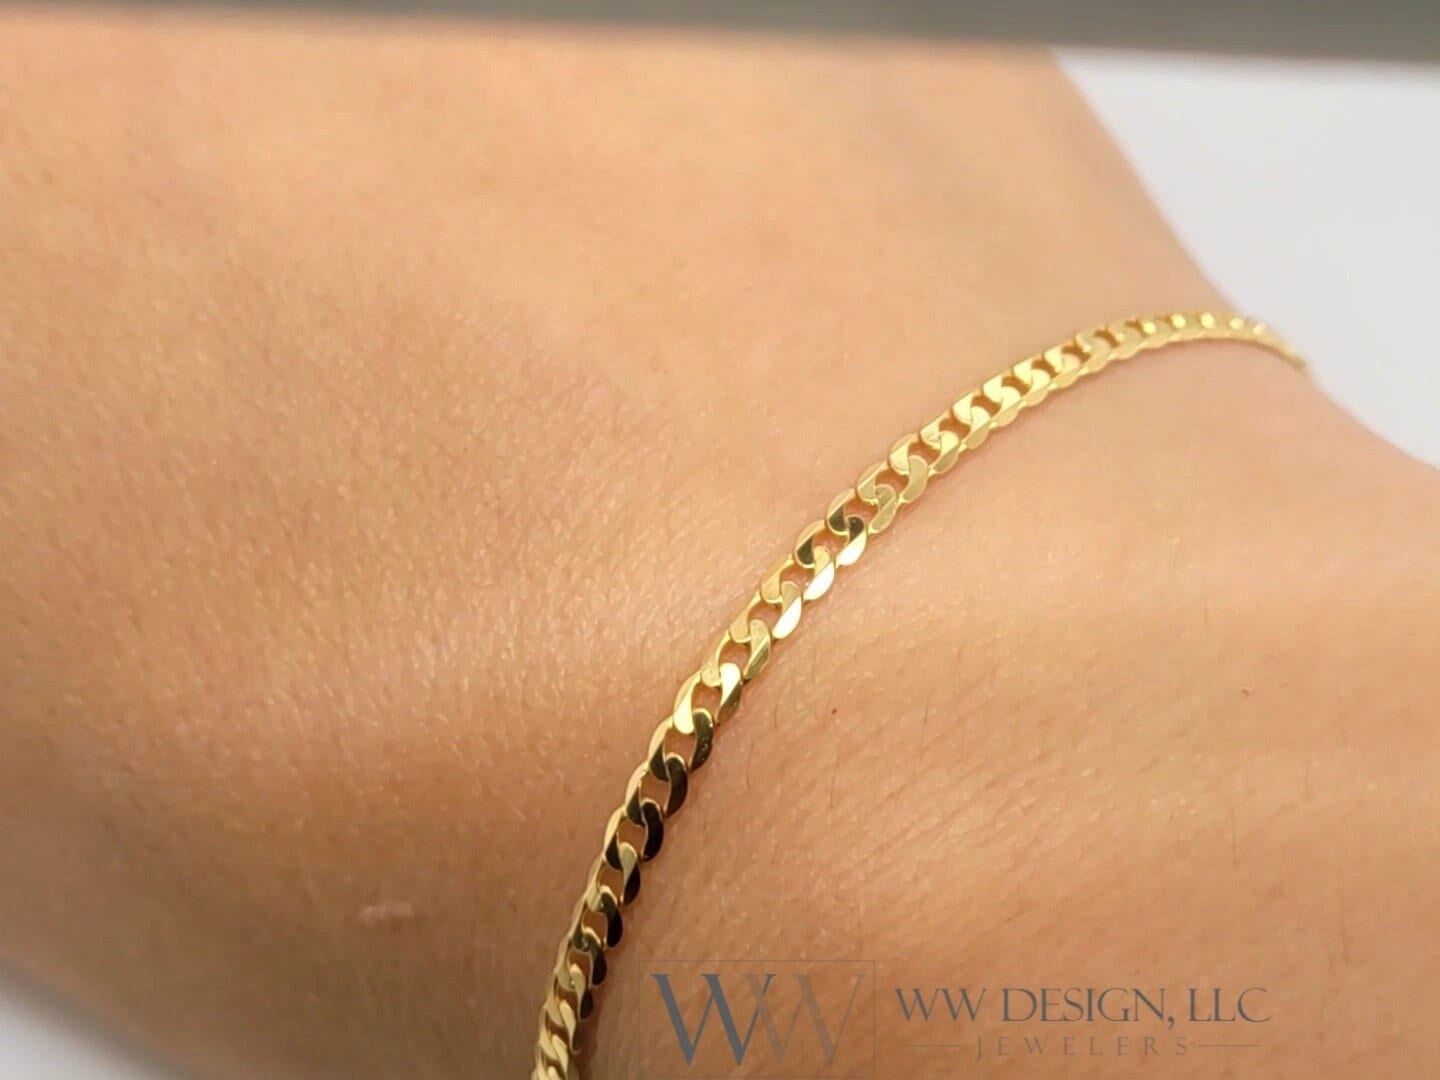 14k Gold Curb Cuban Bracelet FLAT 3mm 14k Solid Yellow Gold Jewelry Gift 7 inches Very Shiny High Polish Bridesmades Gift Christmas Present